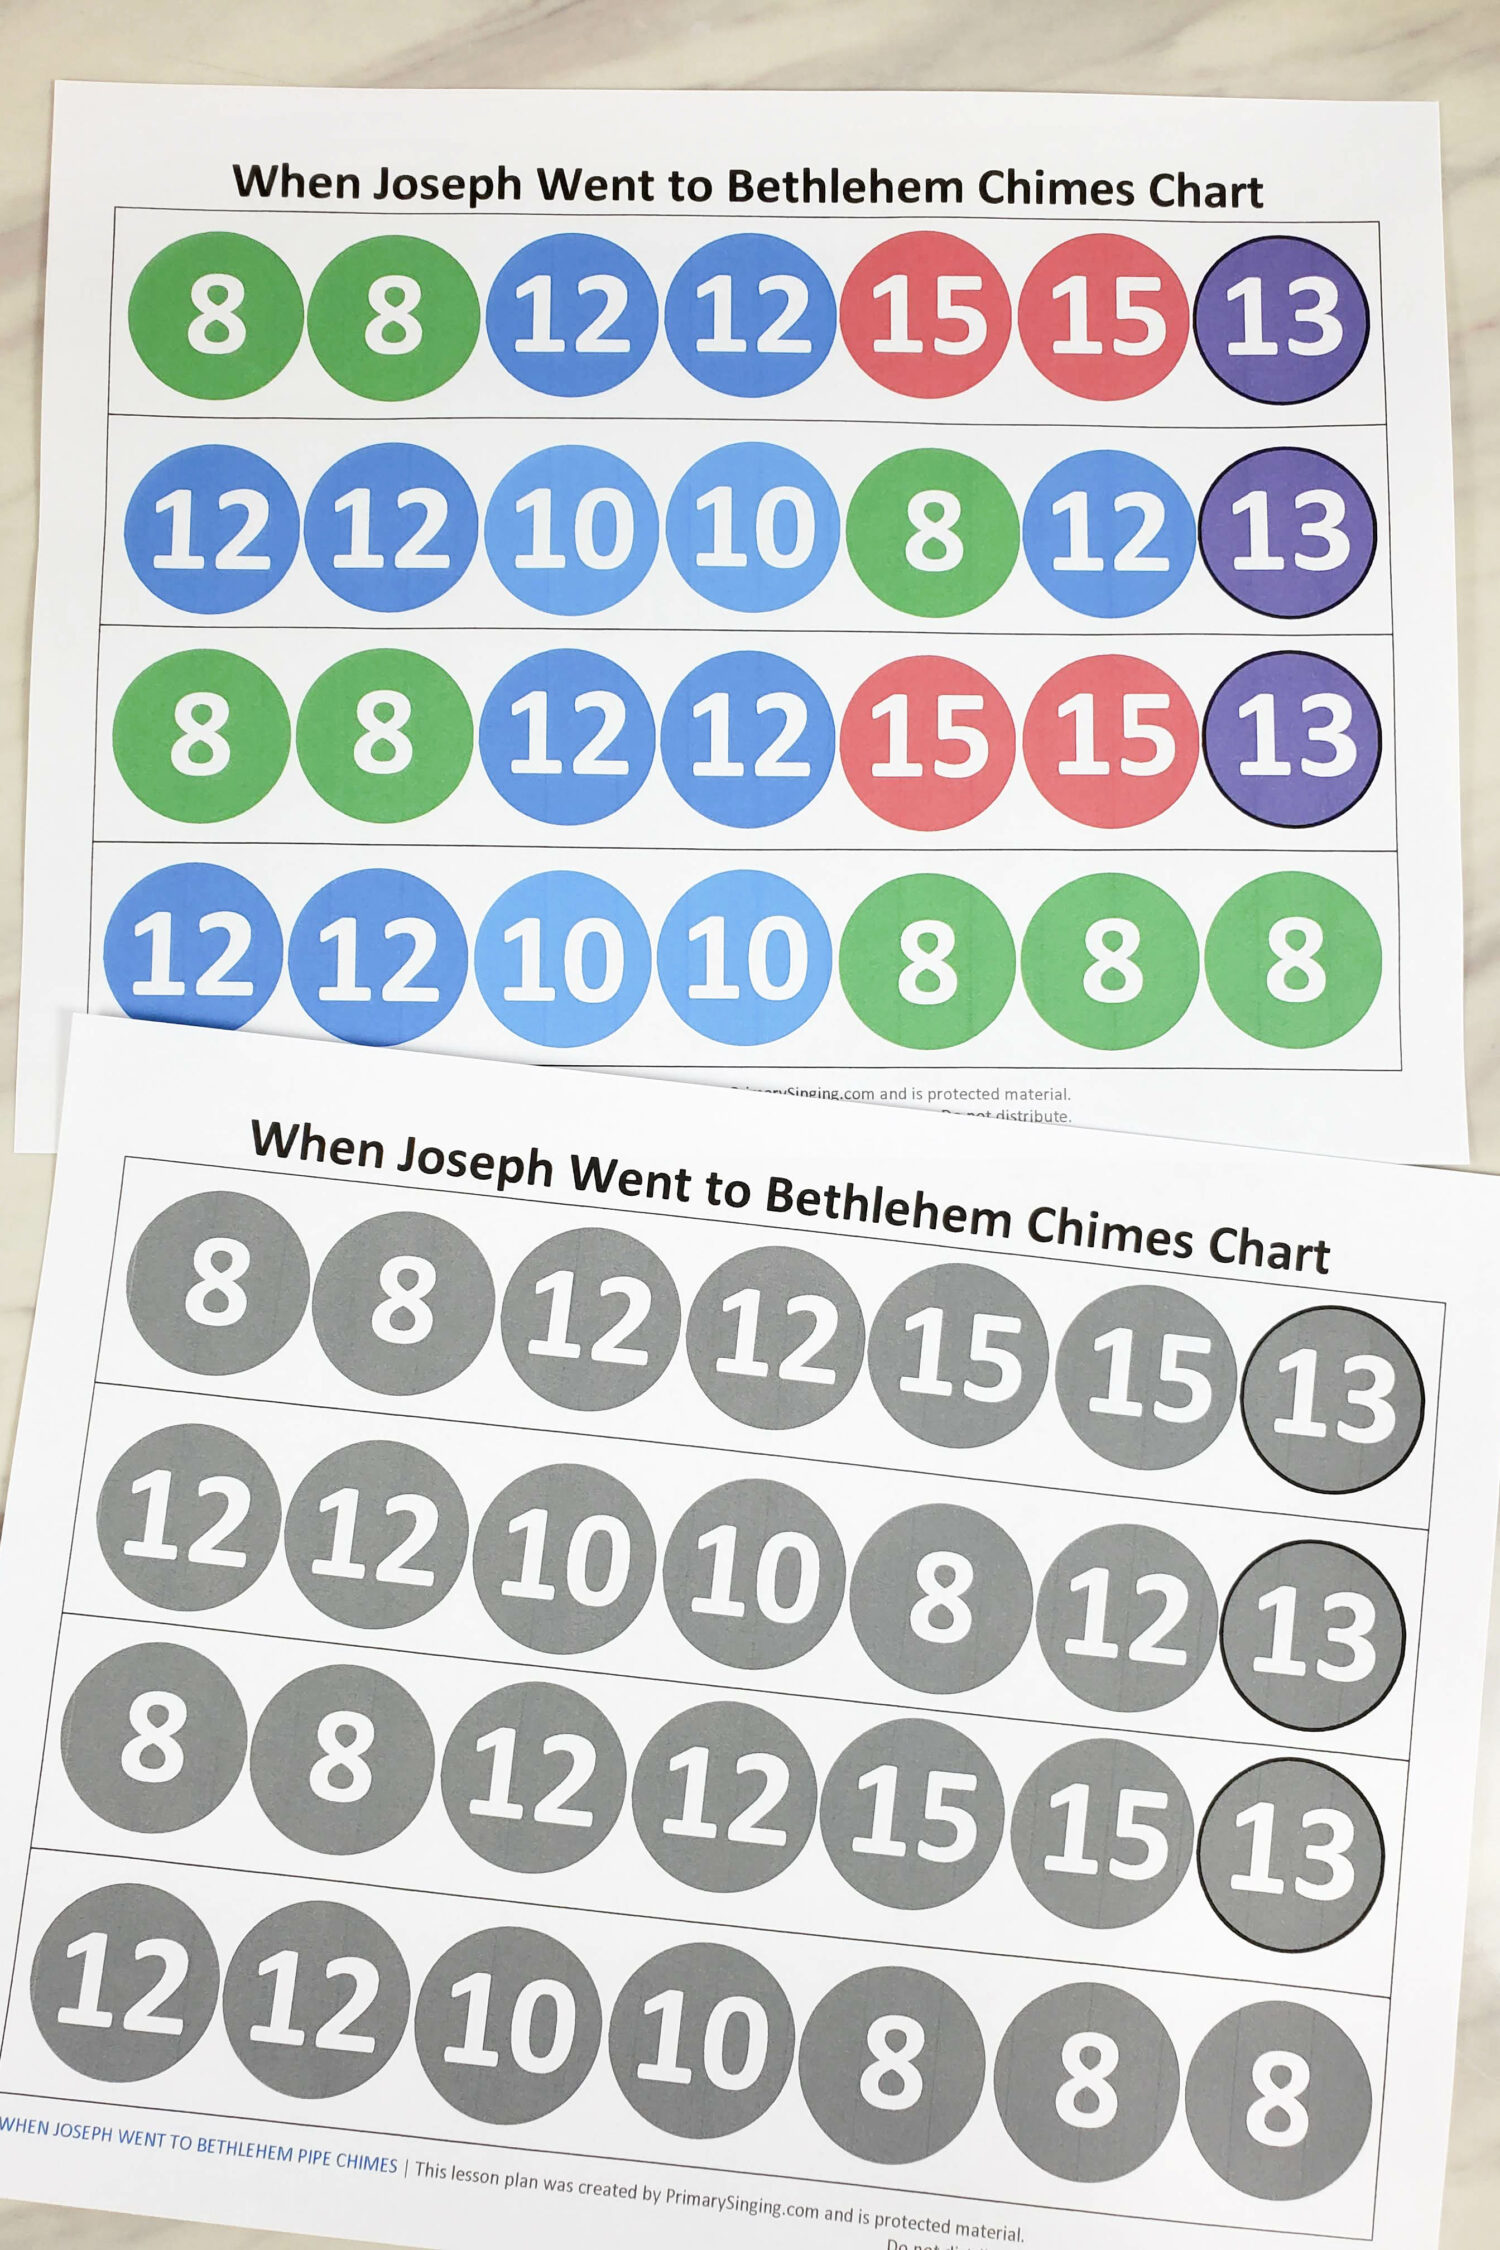 When Joseph Went to Bethlehem Chimes chart singing time idea! Head over to grab this printable chime charts to help teach the LDS Christmas song When Joseph Went to Bethlehem in your Primary room! You'll love using chimes for the Christmas season.